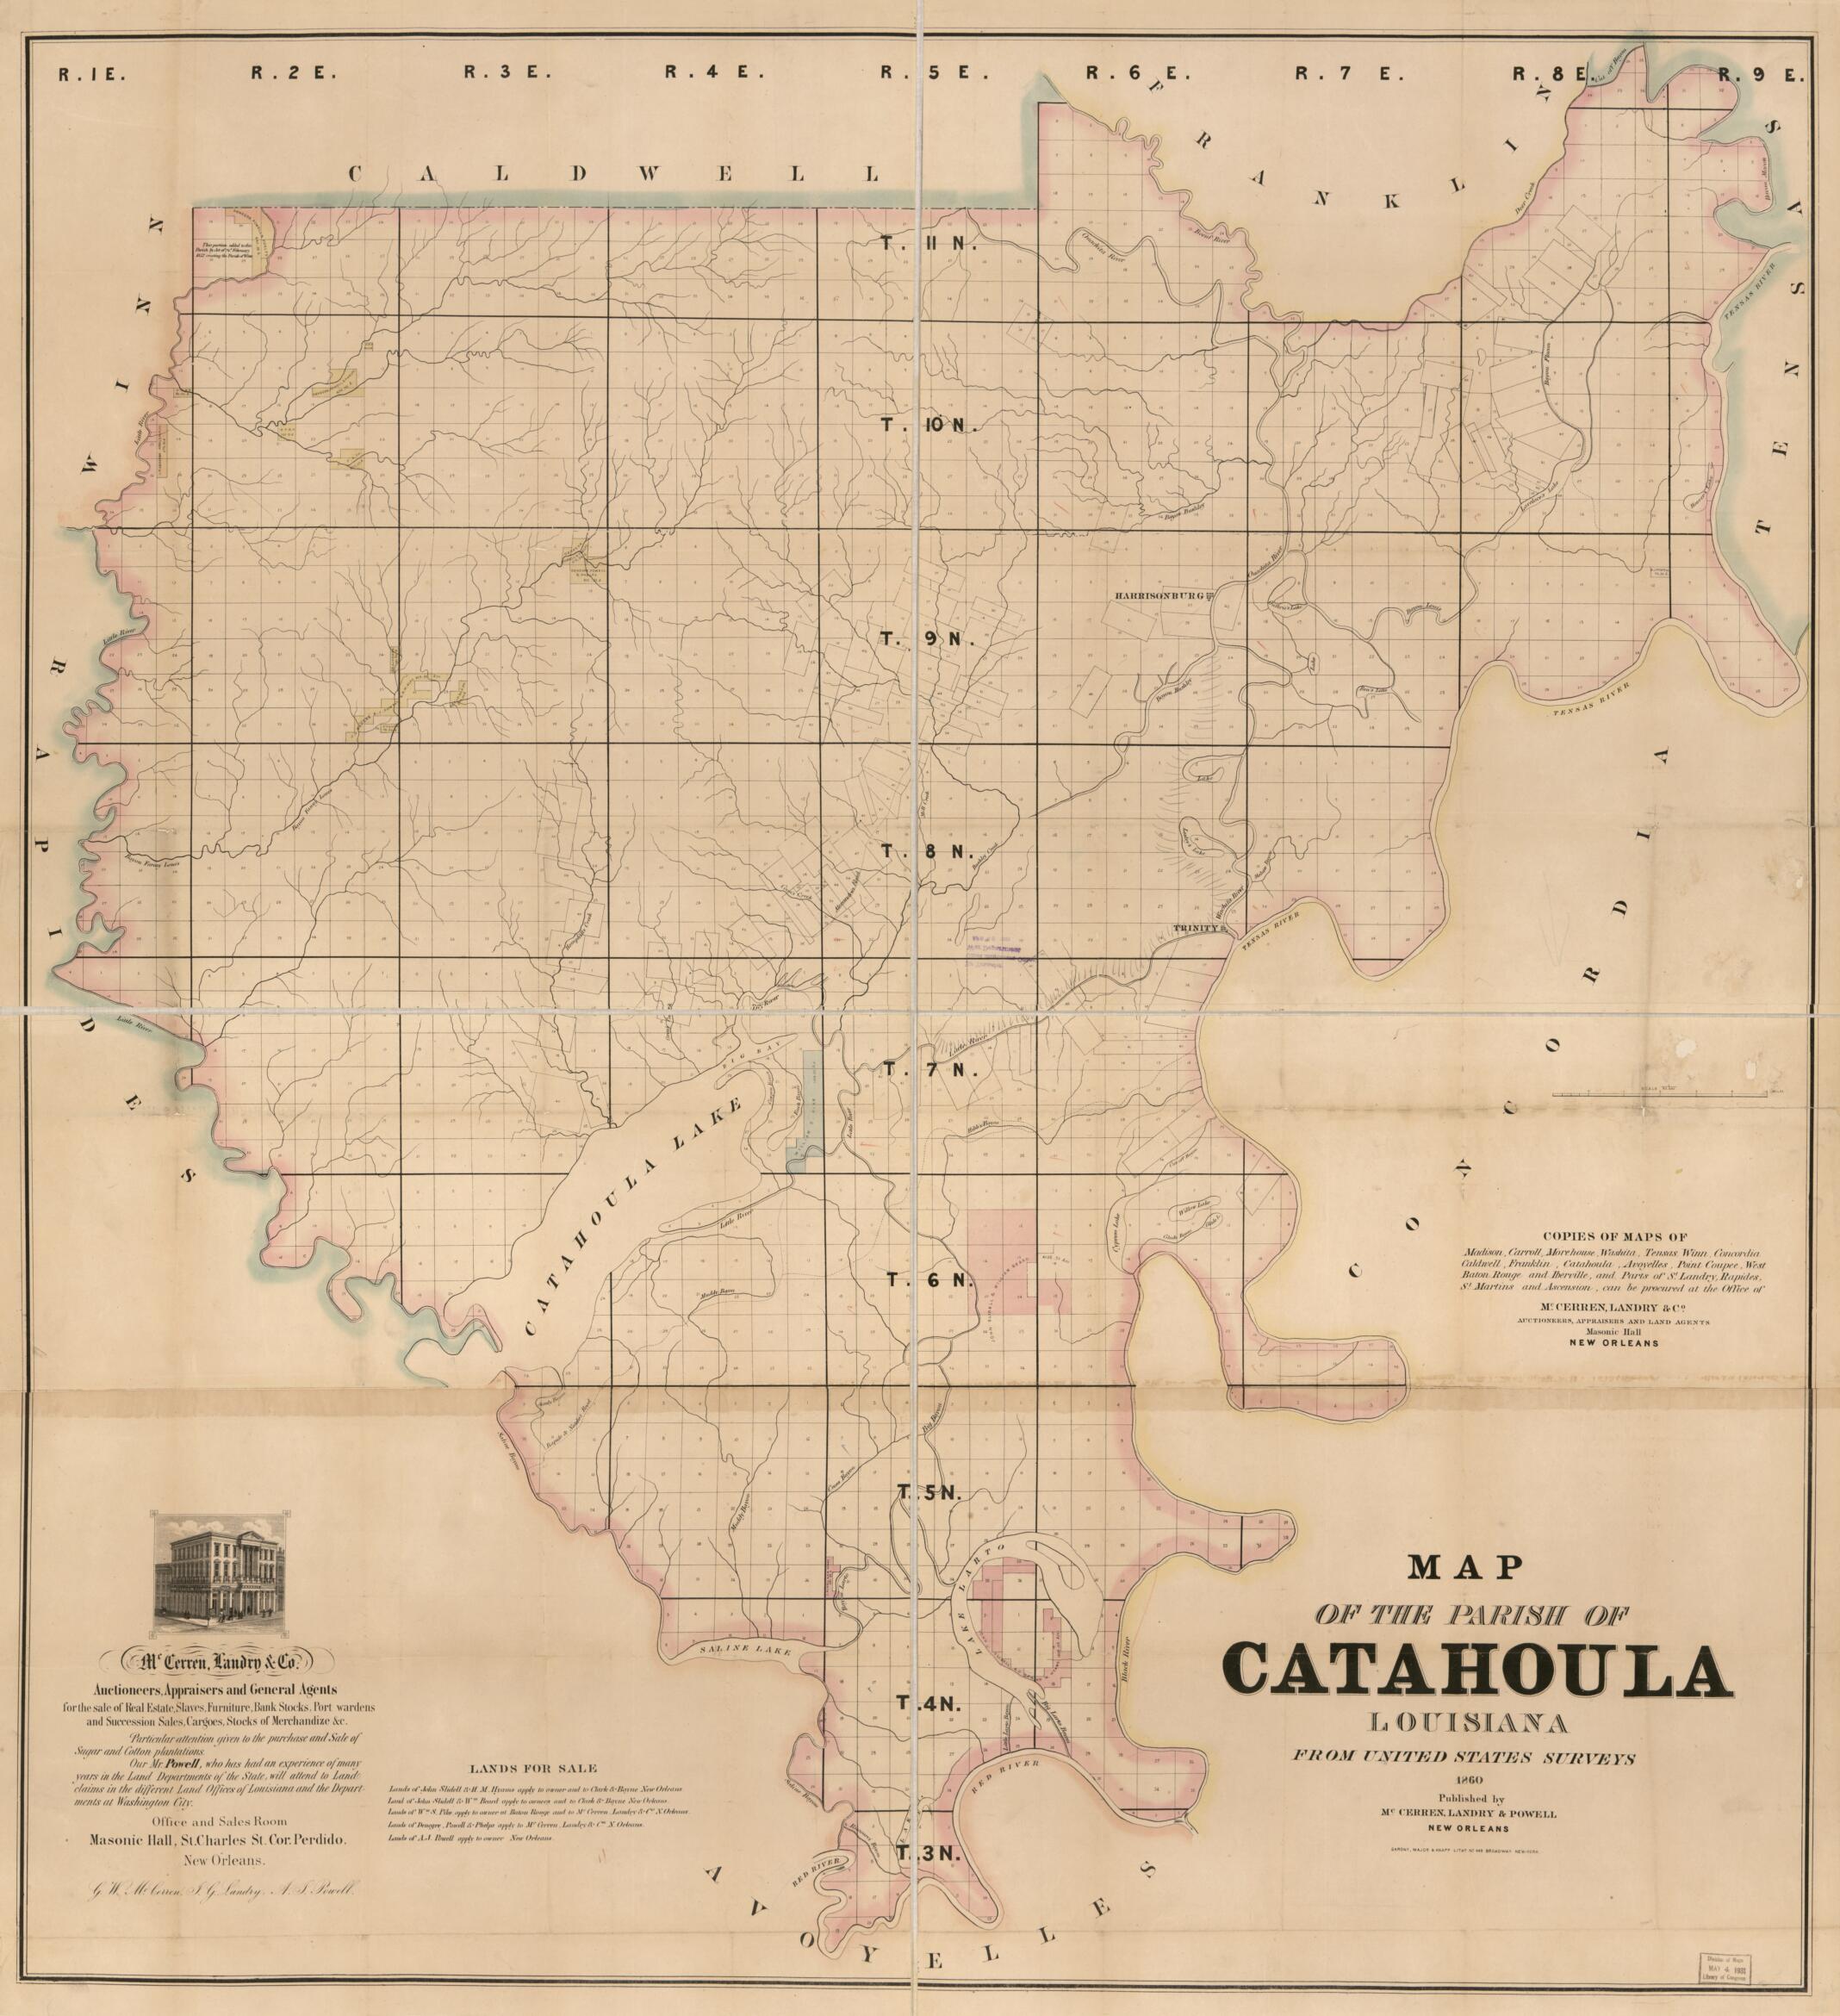 This old map of Map of the Parish of Catahoula, Louisiana : from United States Surveys from 1860 was created by Landry &amp; Powell McCerren in 1860